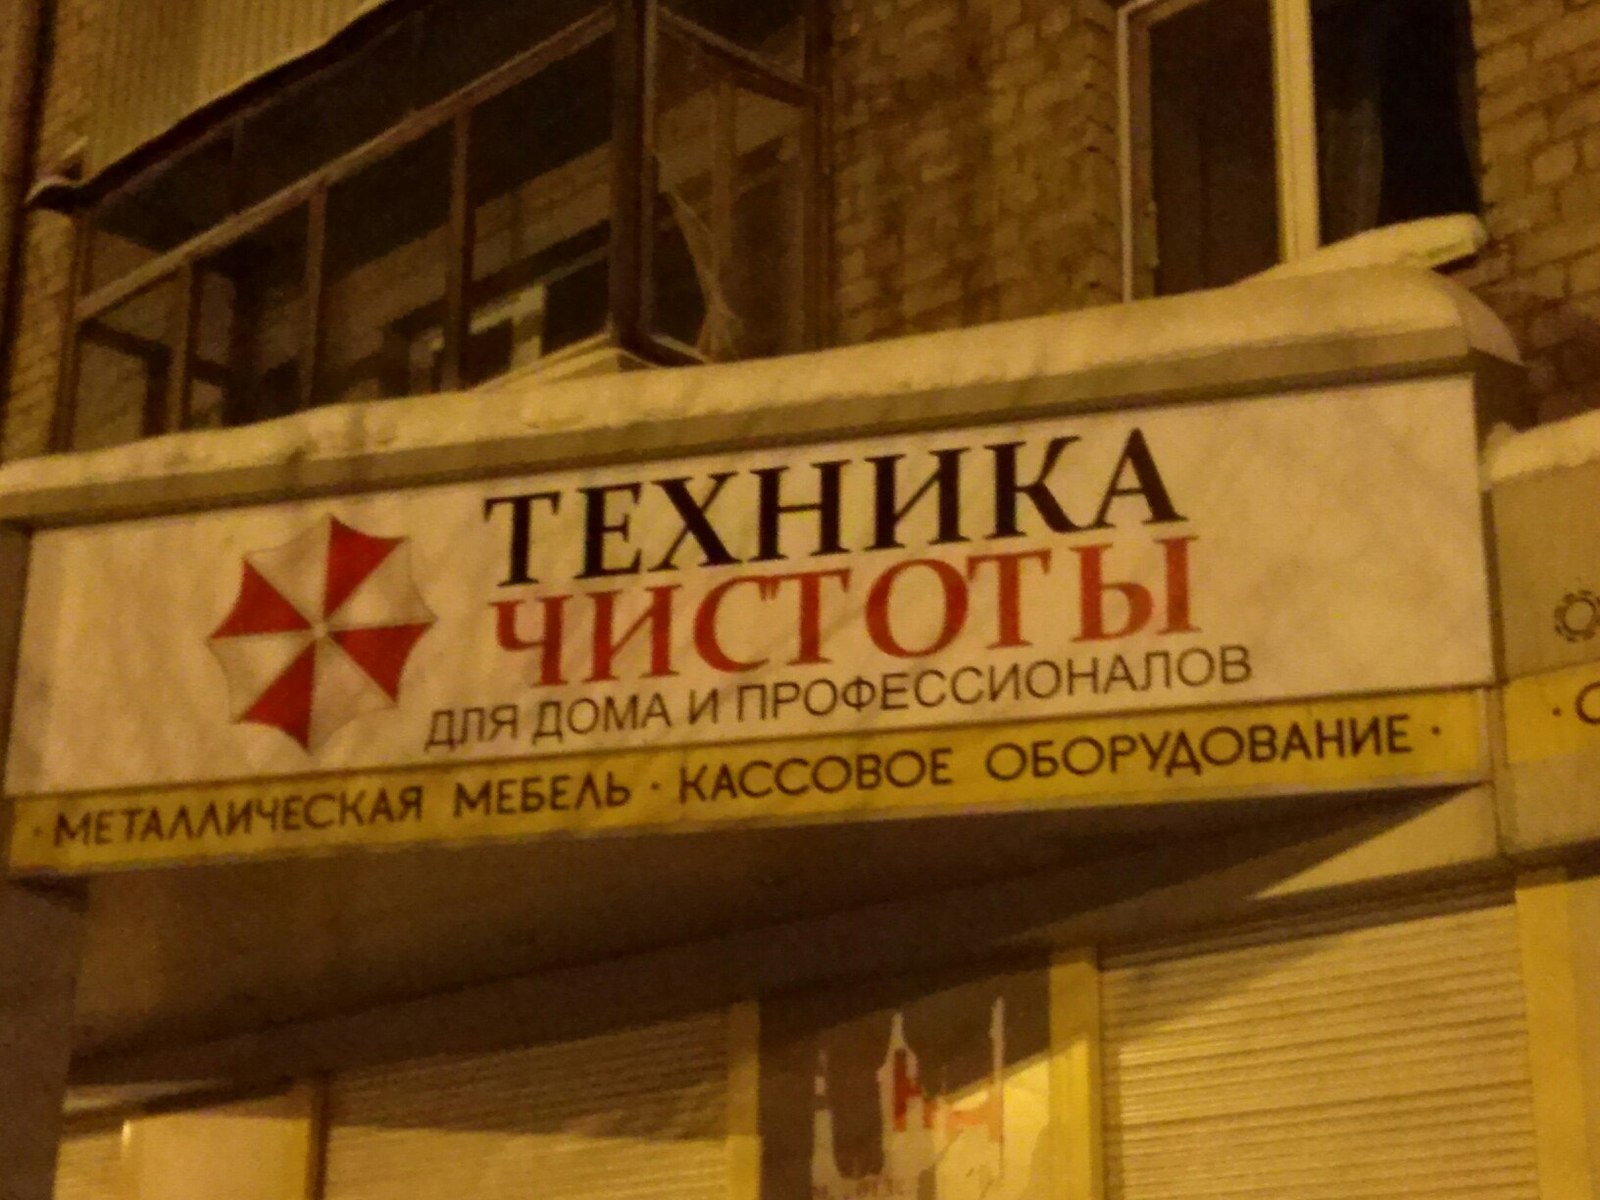 Deeply conspiratorial Umbrella branch in Russia - My, Umbrella Corporation, Images, Purity, My